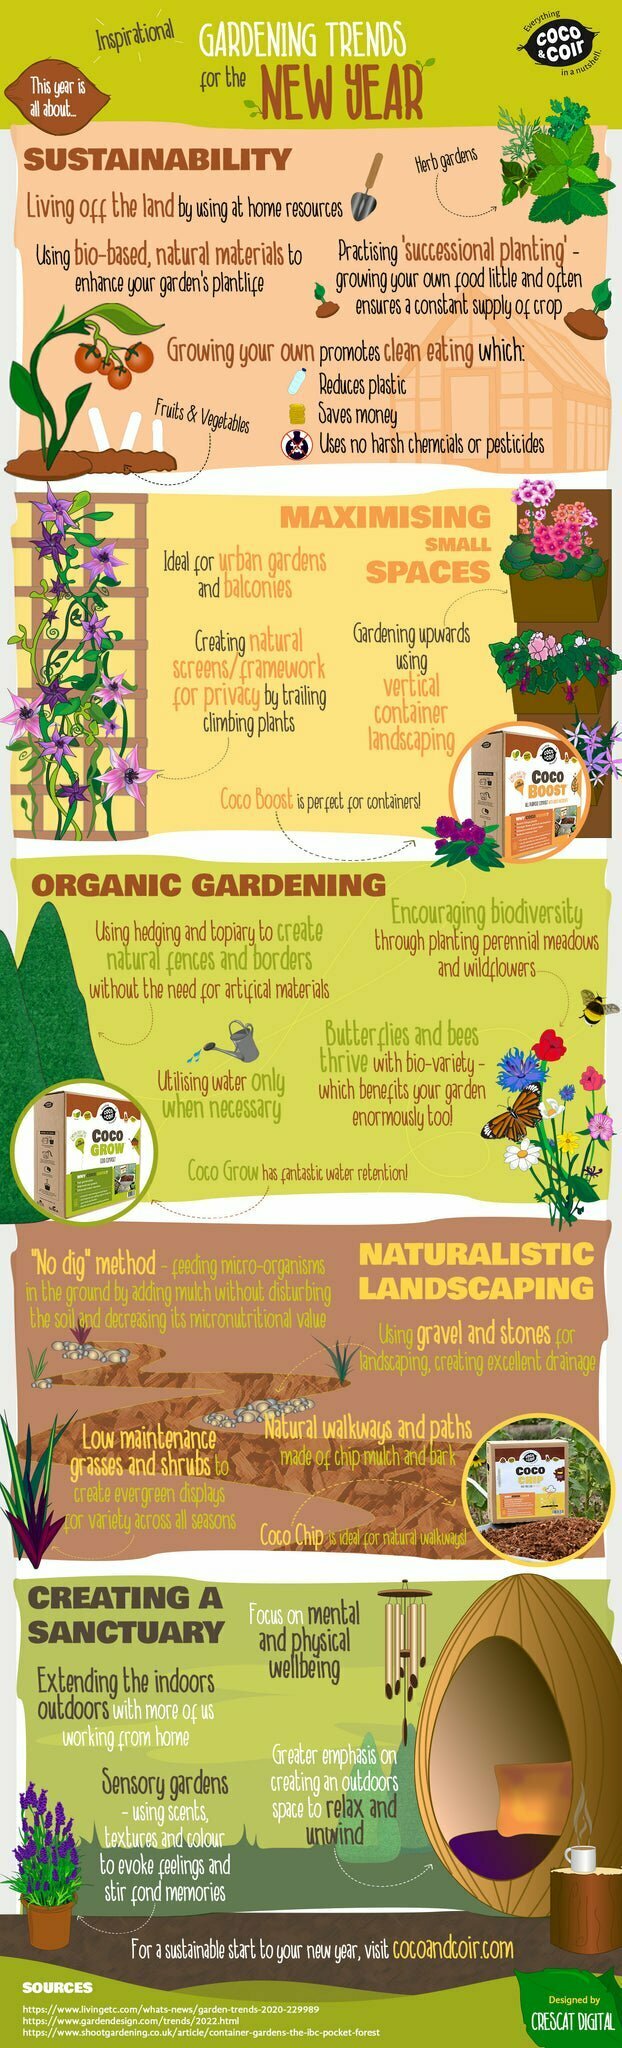 Infographic detailing a range of the key sustainable, lifestyle and organic gardening trends for the coming year.